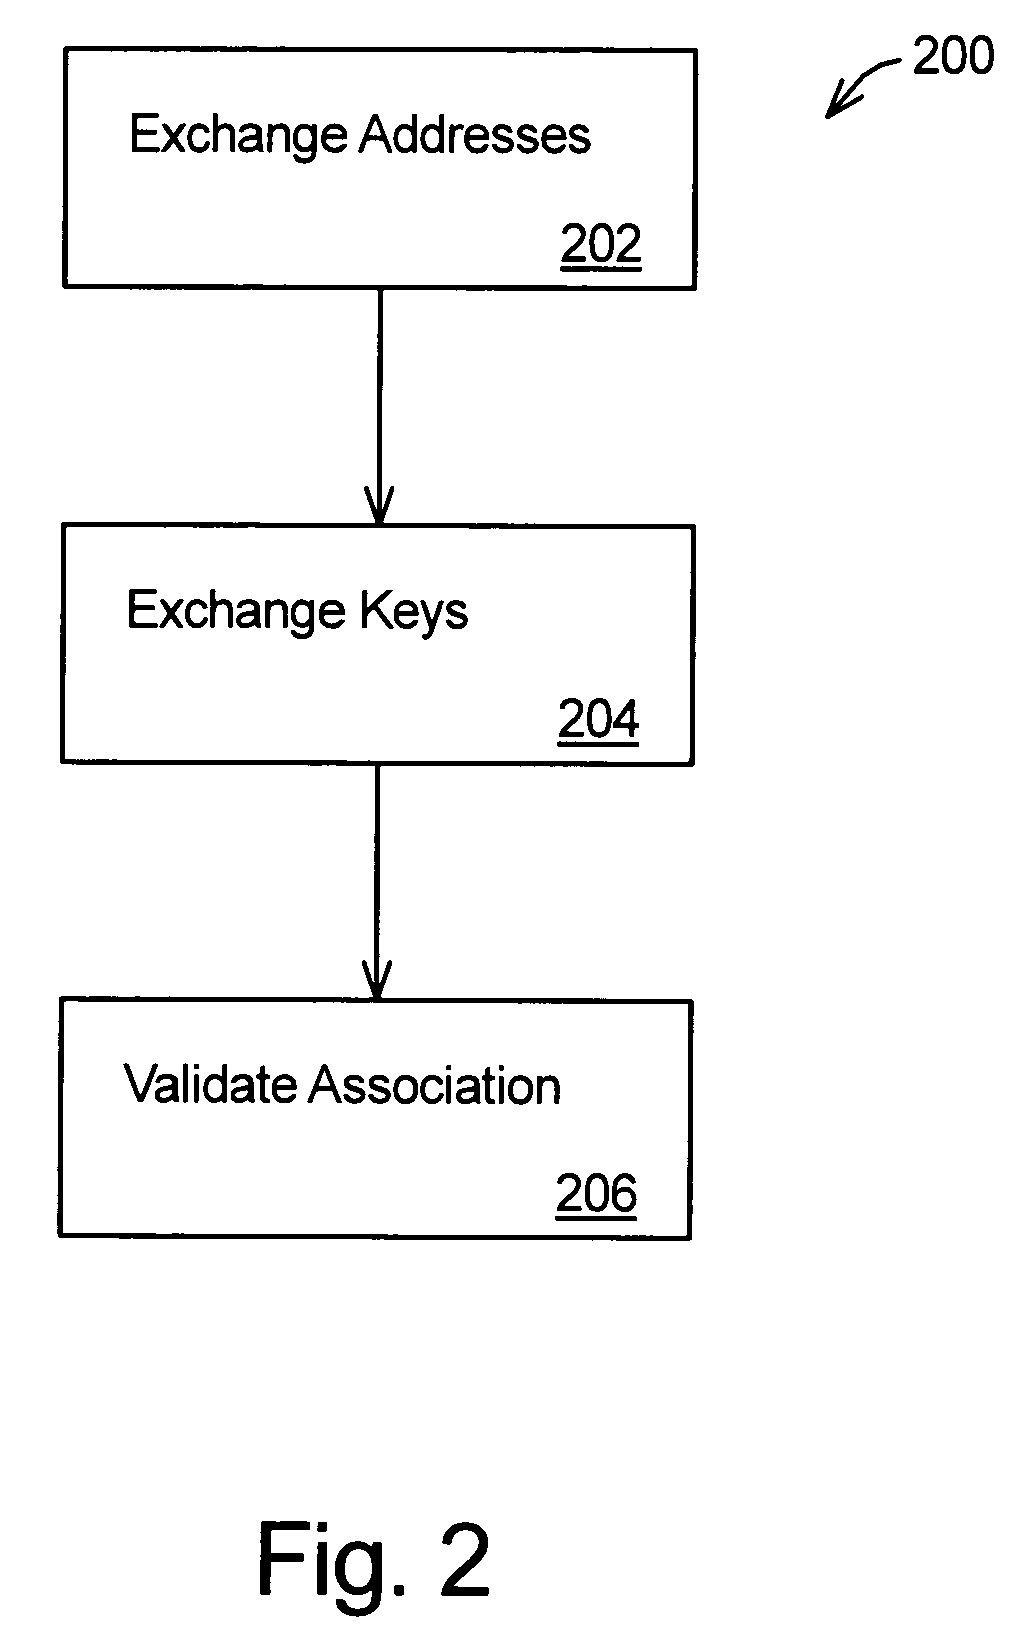 Validation for secure device associations